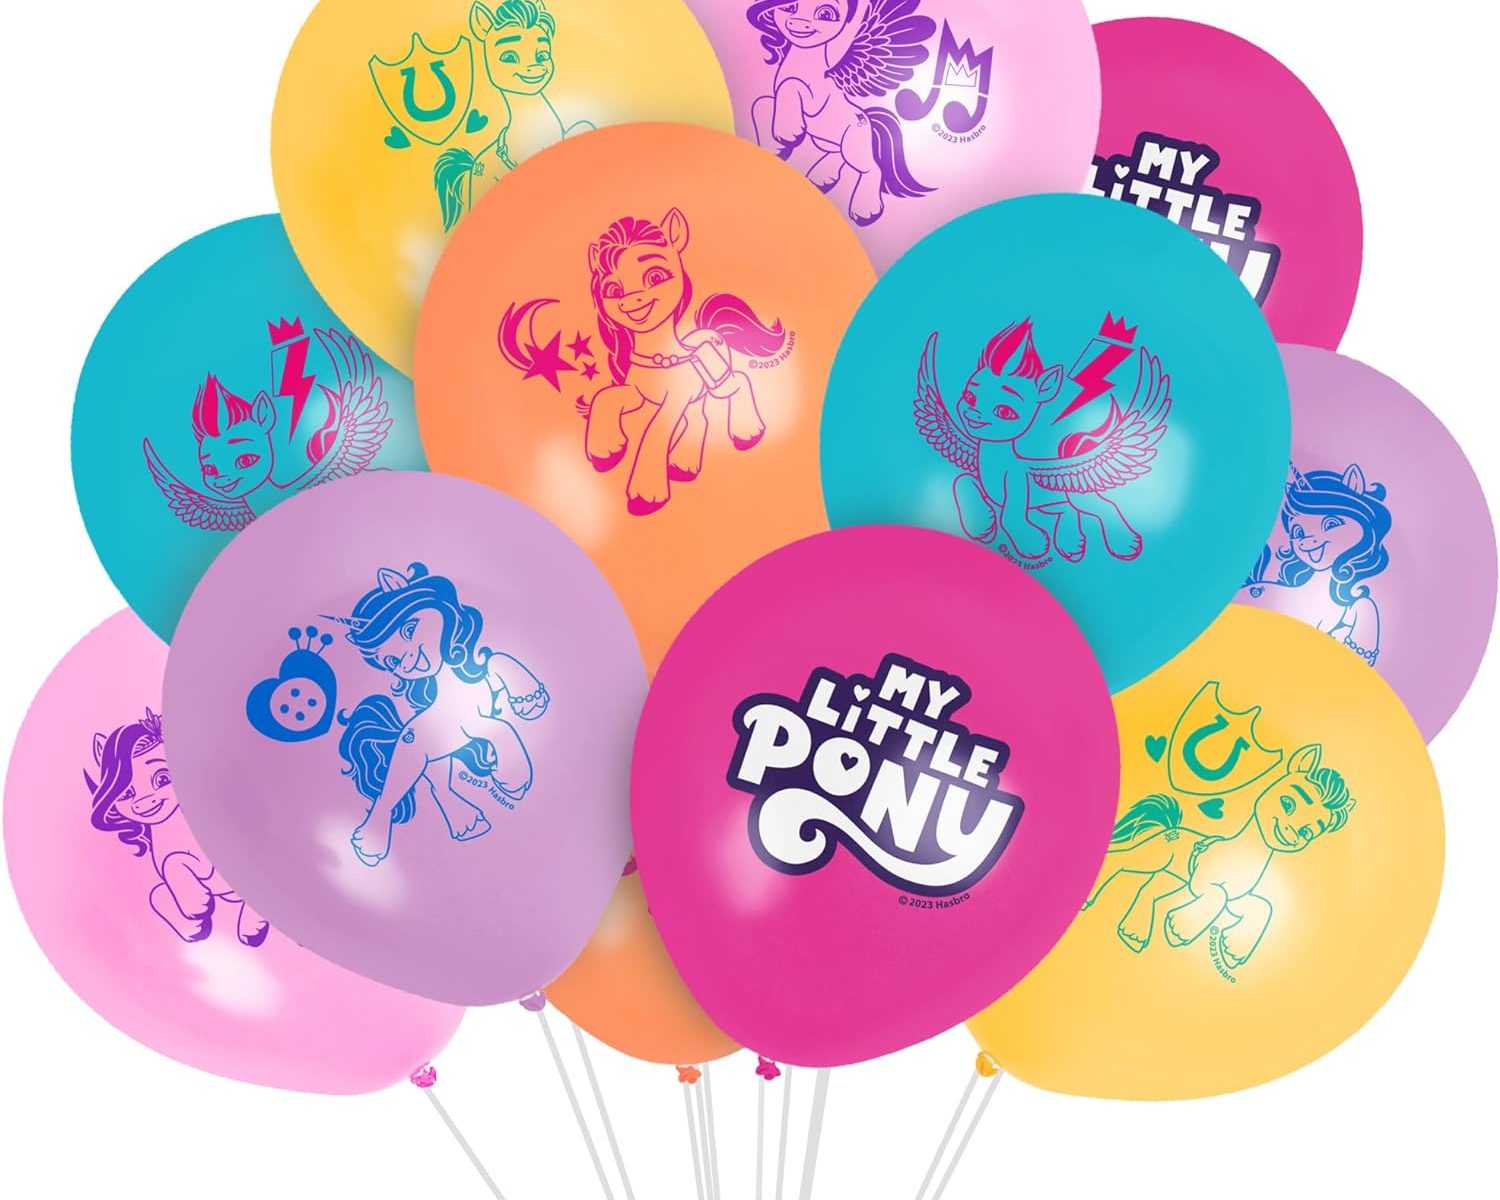 MLP: MYM The Mane 5 Character Birthday Party Balloons Set